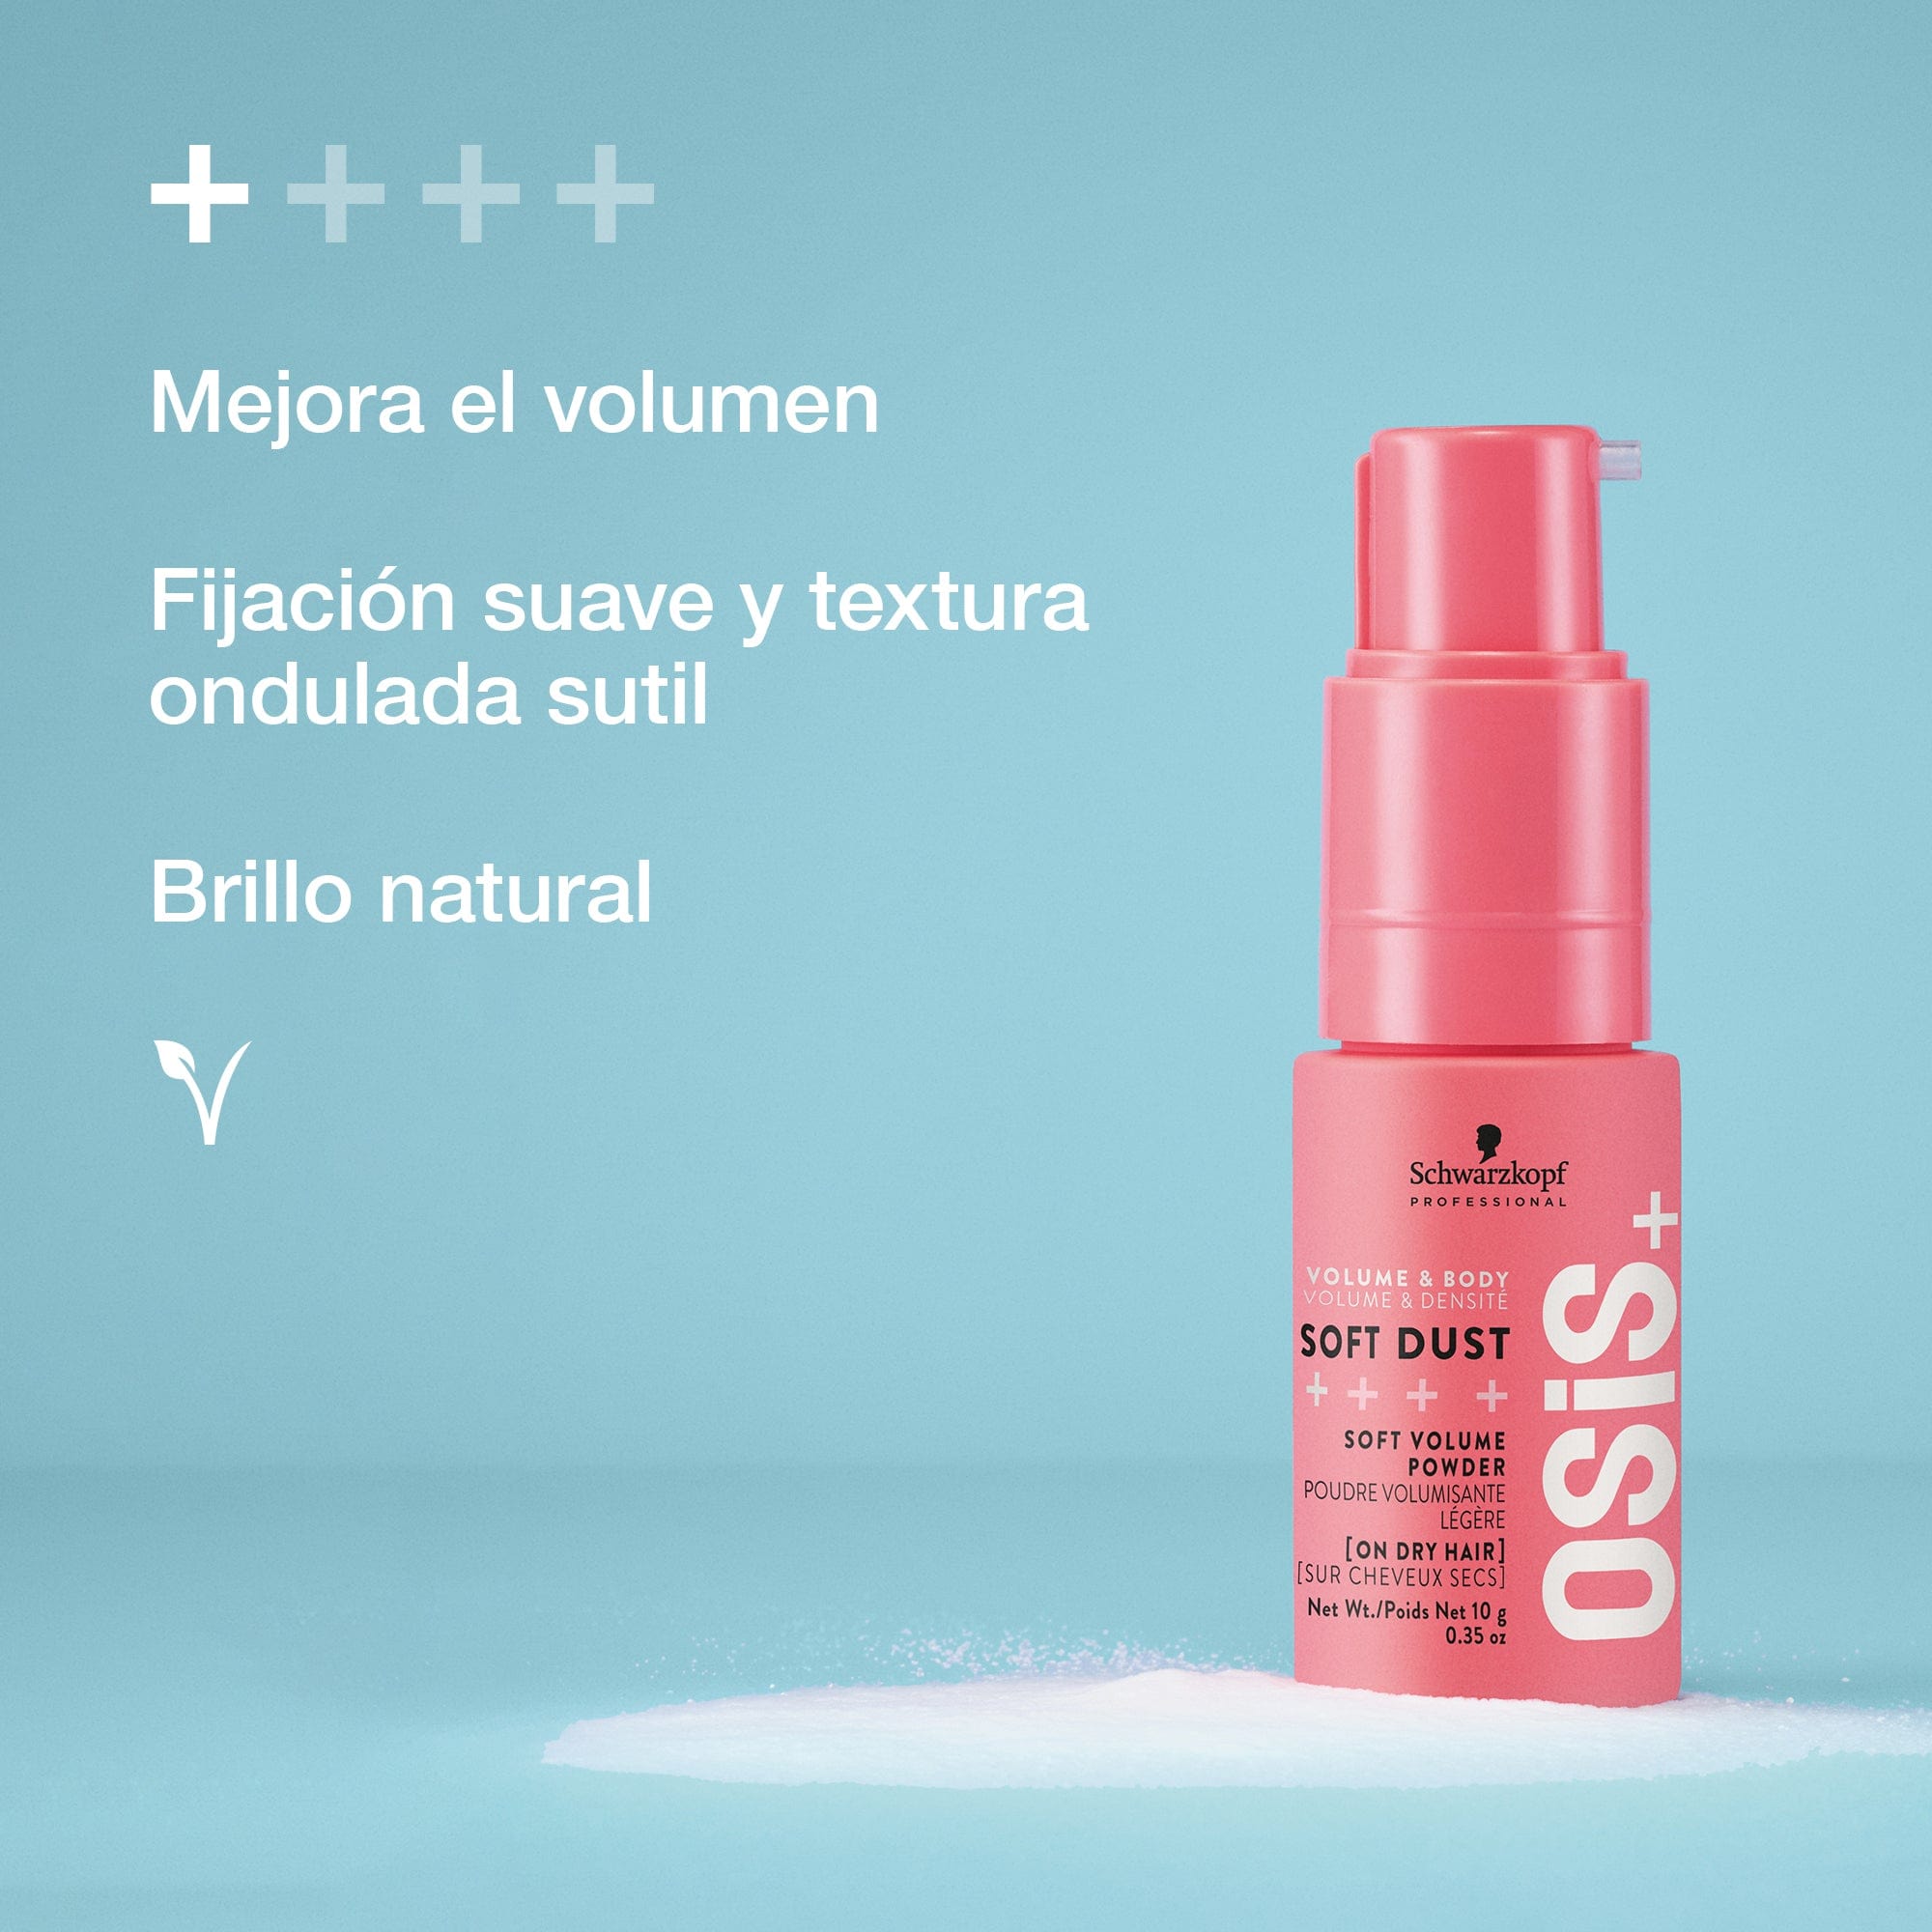 Osis Nuevo Hair Styling Products OSiS Soft Dust 10g Roberta Beauty Club Tienda Online Productos de Peluqueria